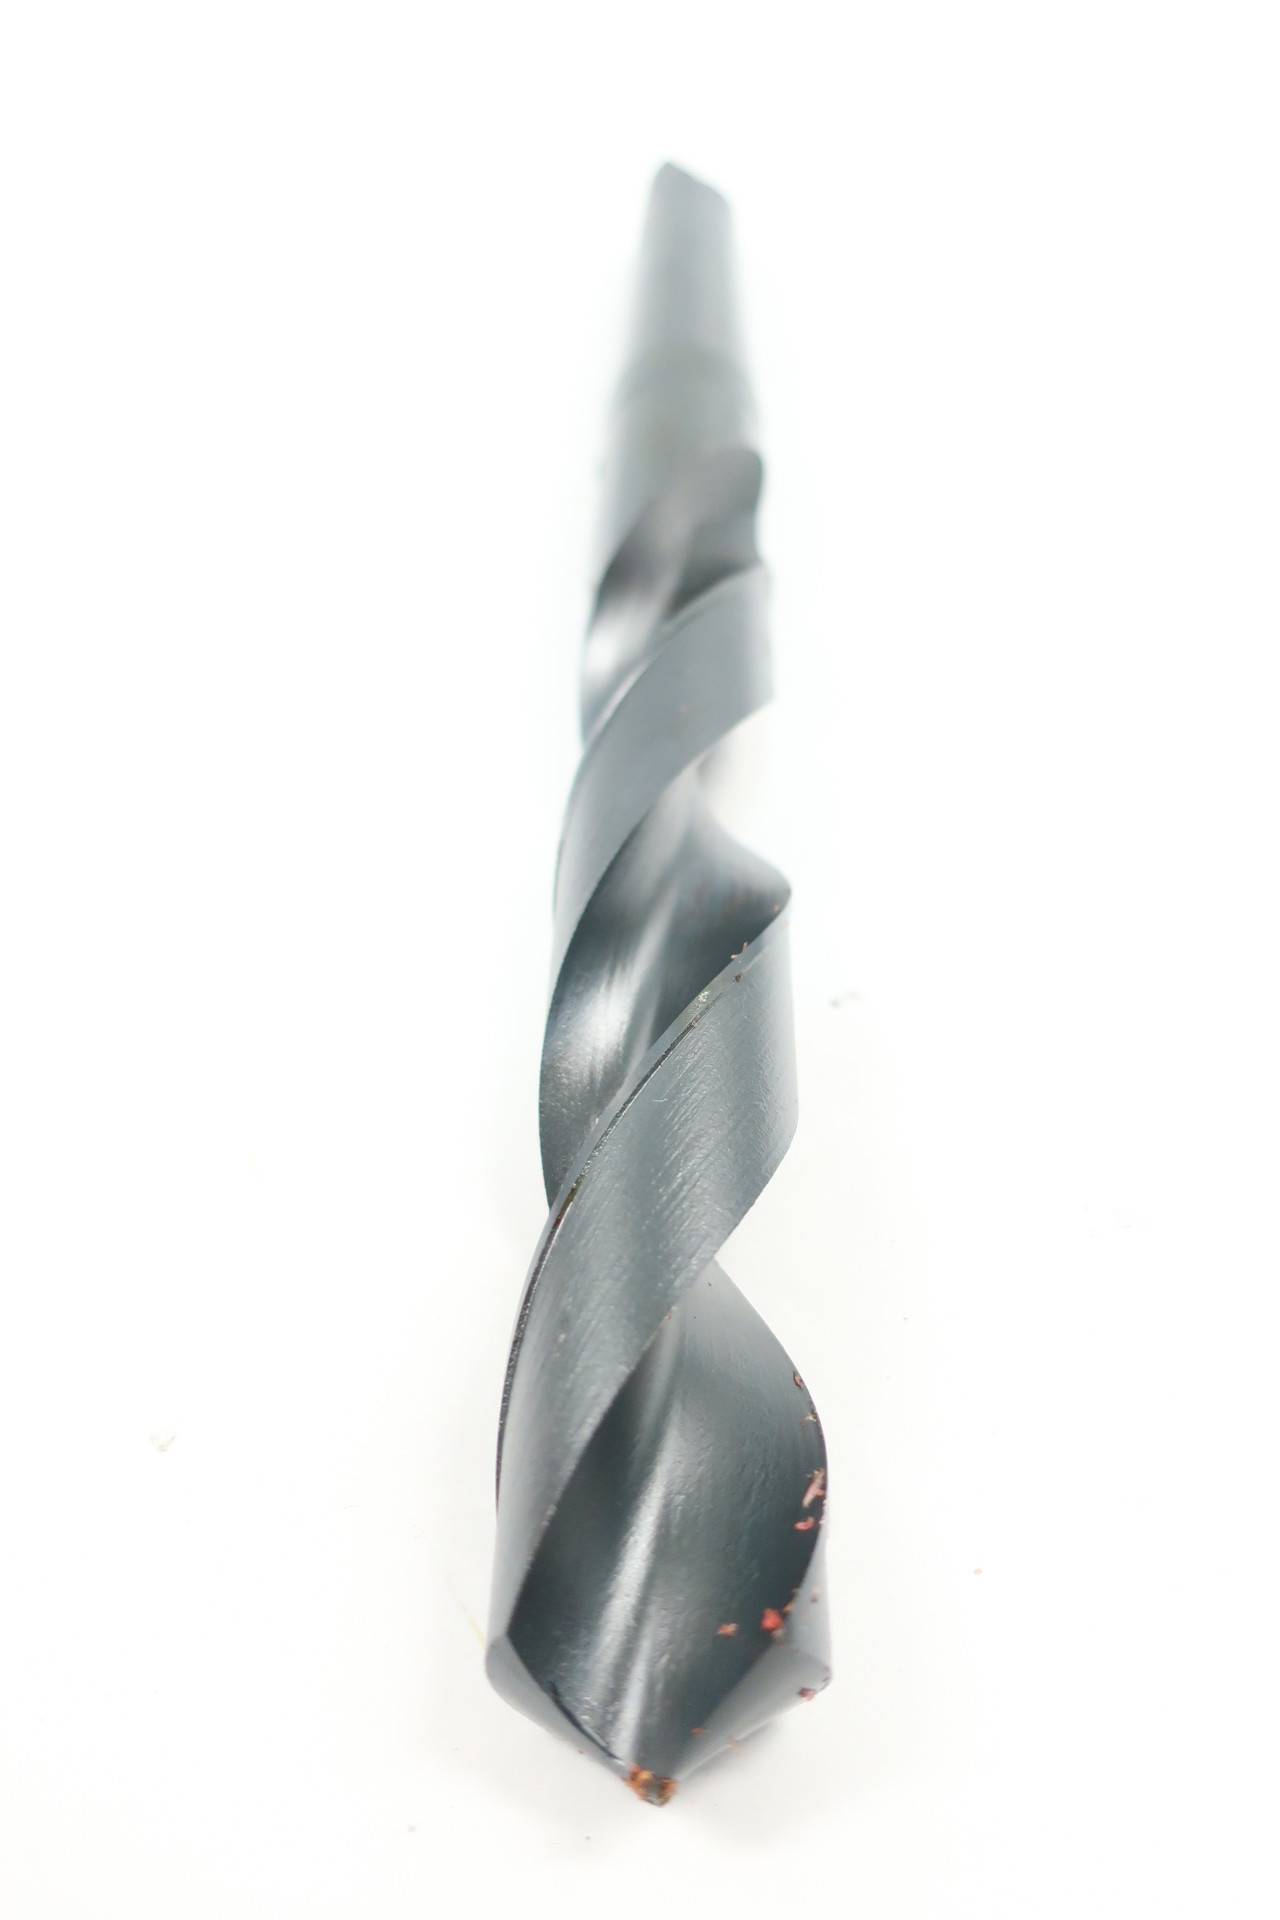 Drill Bit Point Angle 118° Notched Point CLEVELAND Taper Shank Drill Bit Drill Bit Size 41/64 